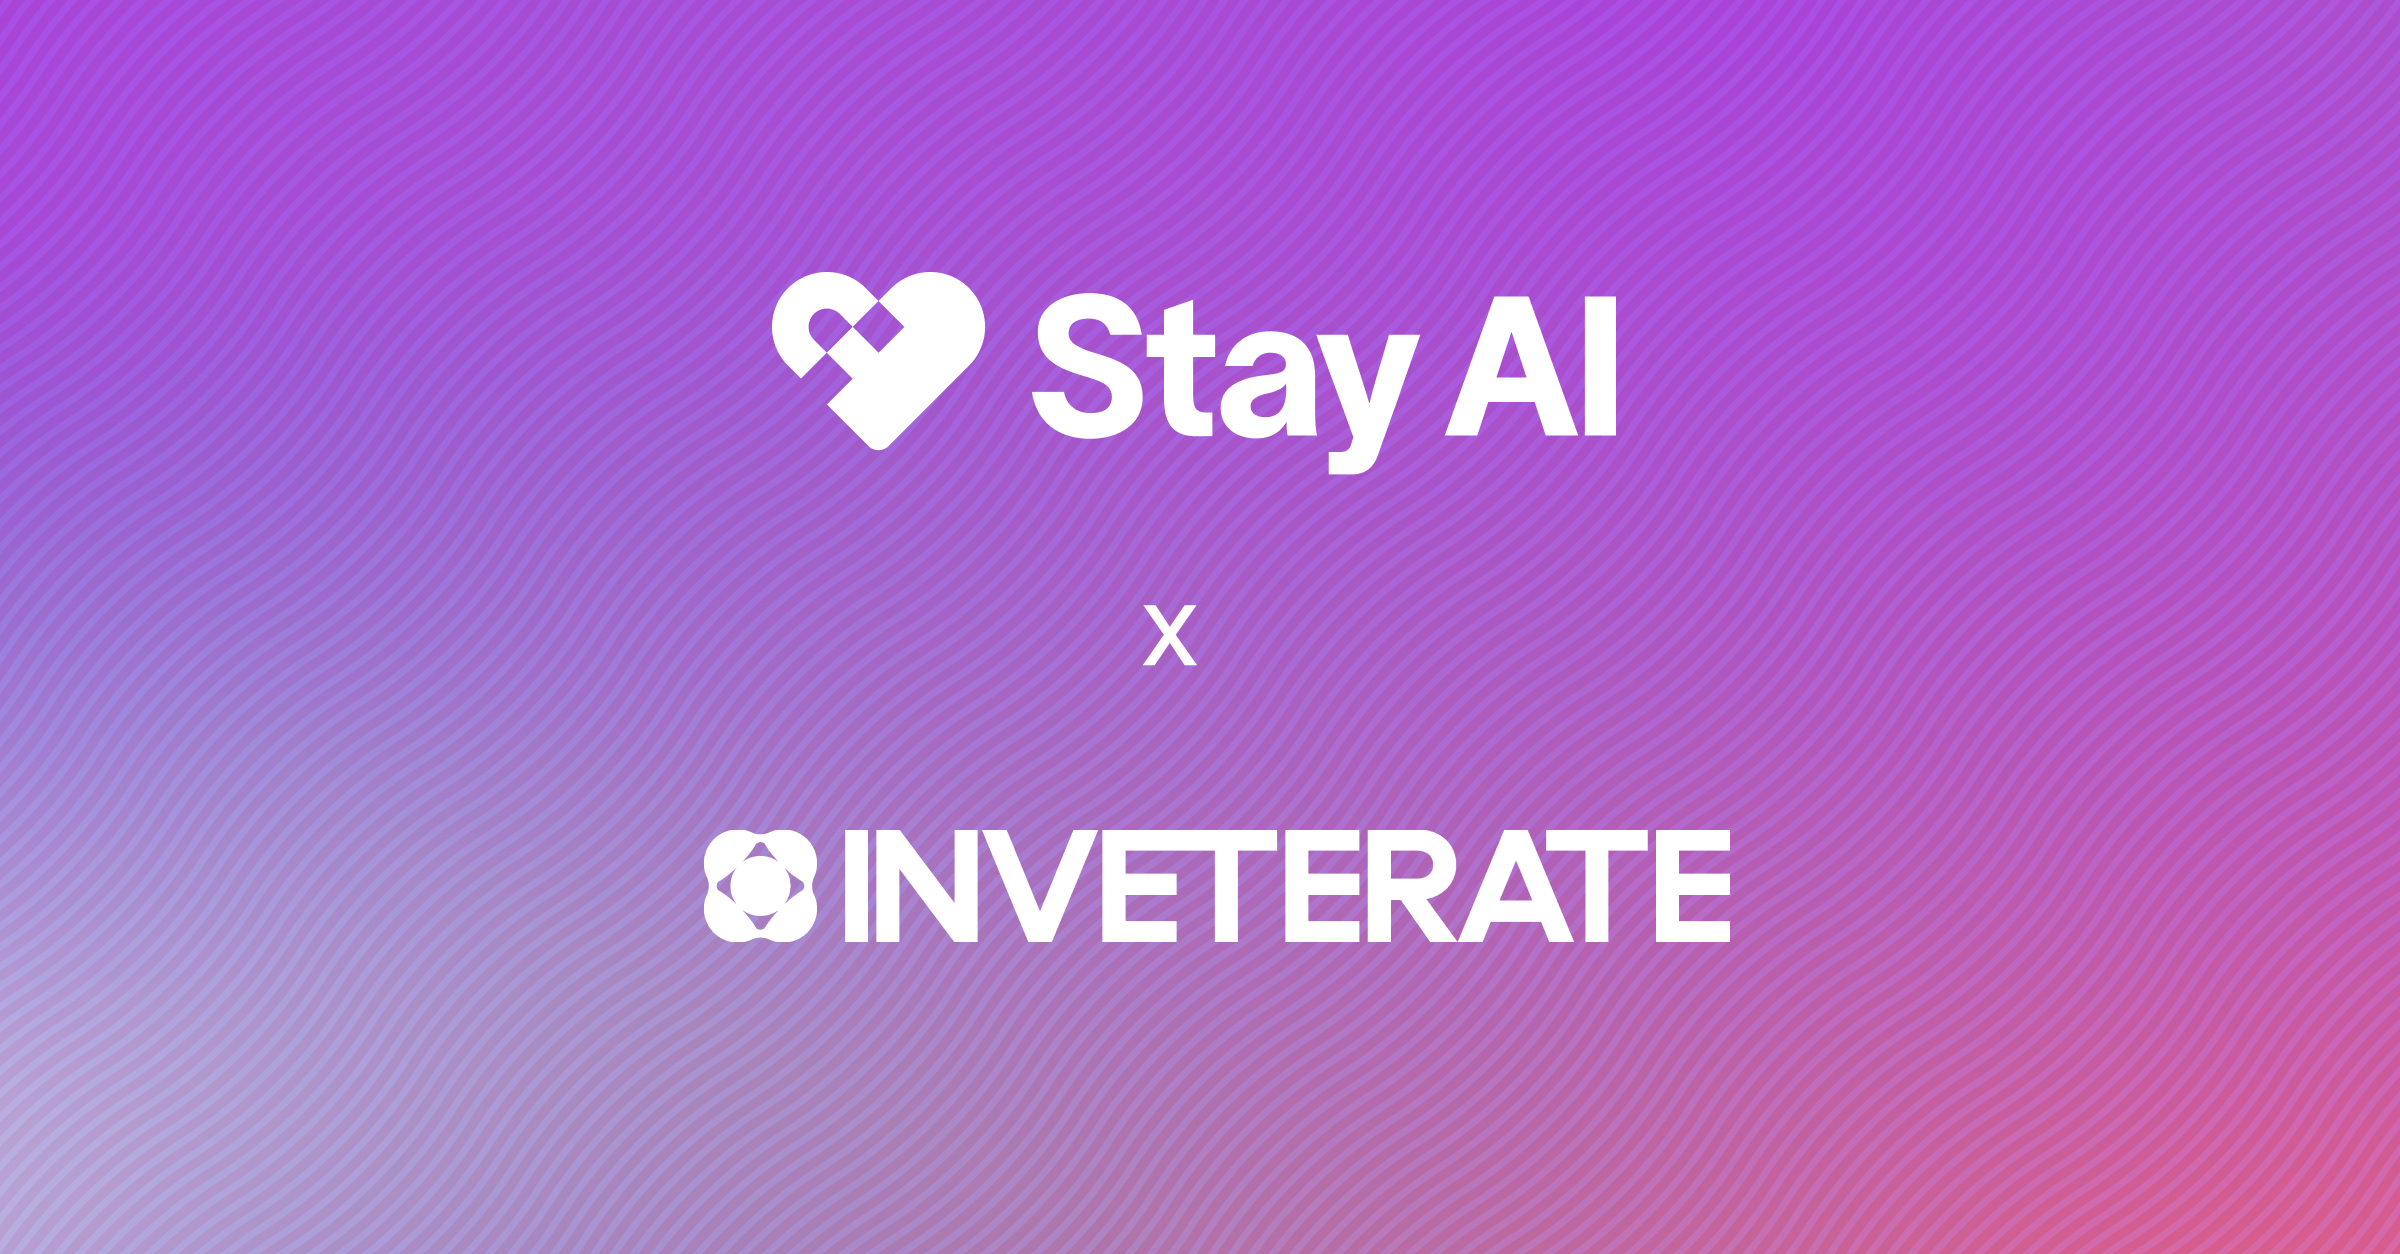 Inveterate Integration with Stay AI